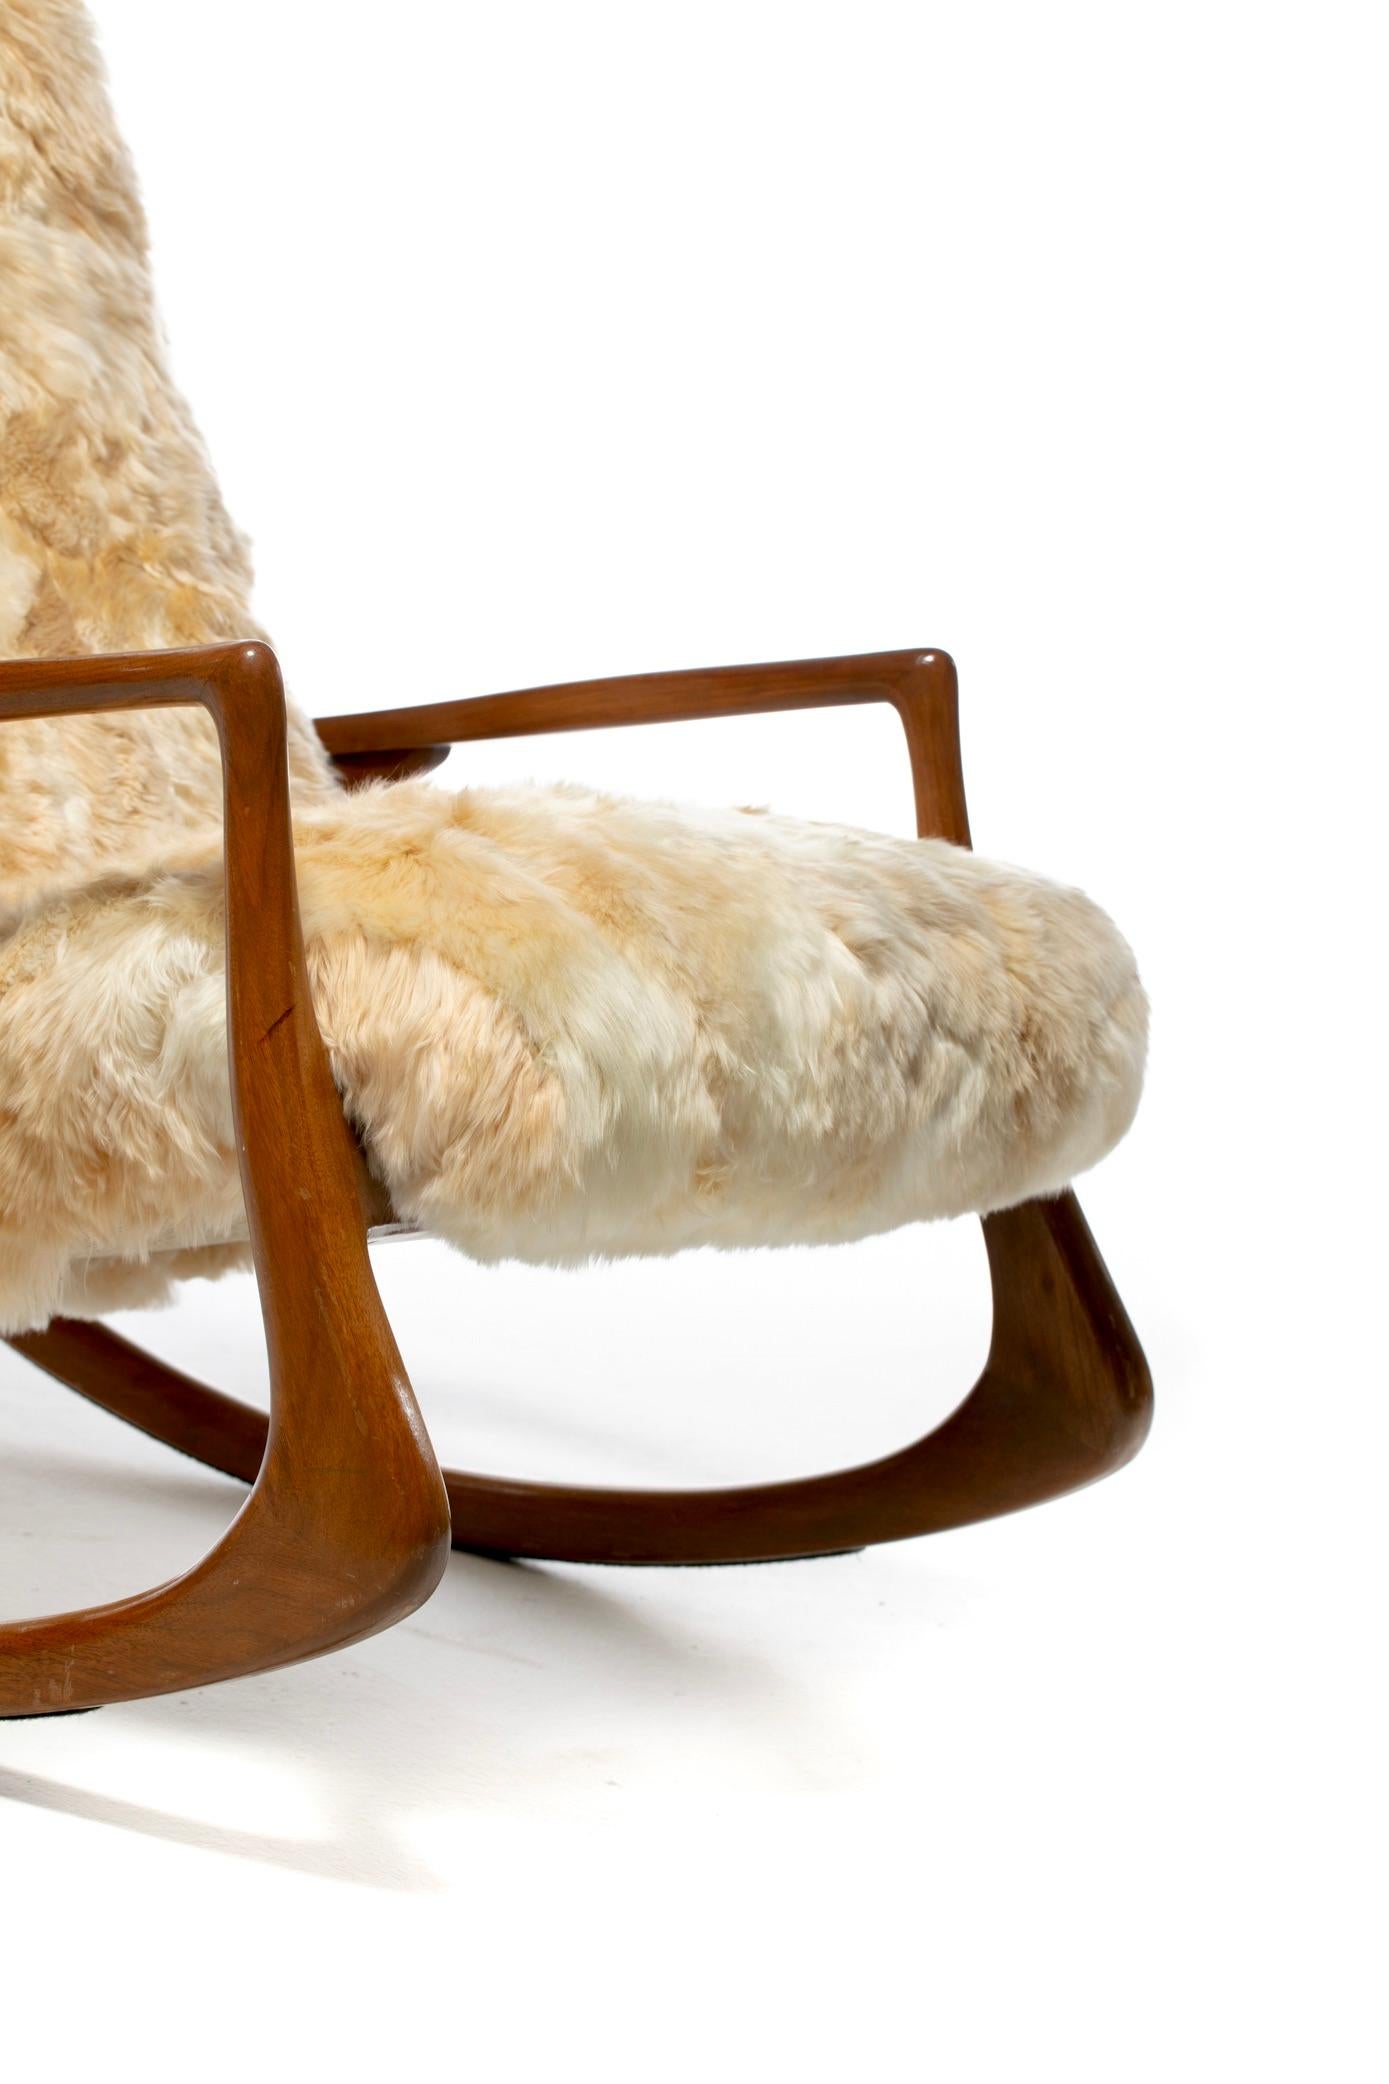 Vladimir Kagan Rocking Chair Upholstered in Champagne Ivory Peruvian Alpaca For Sale 3